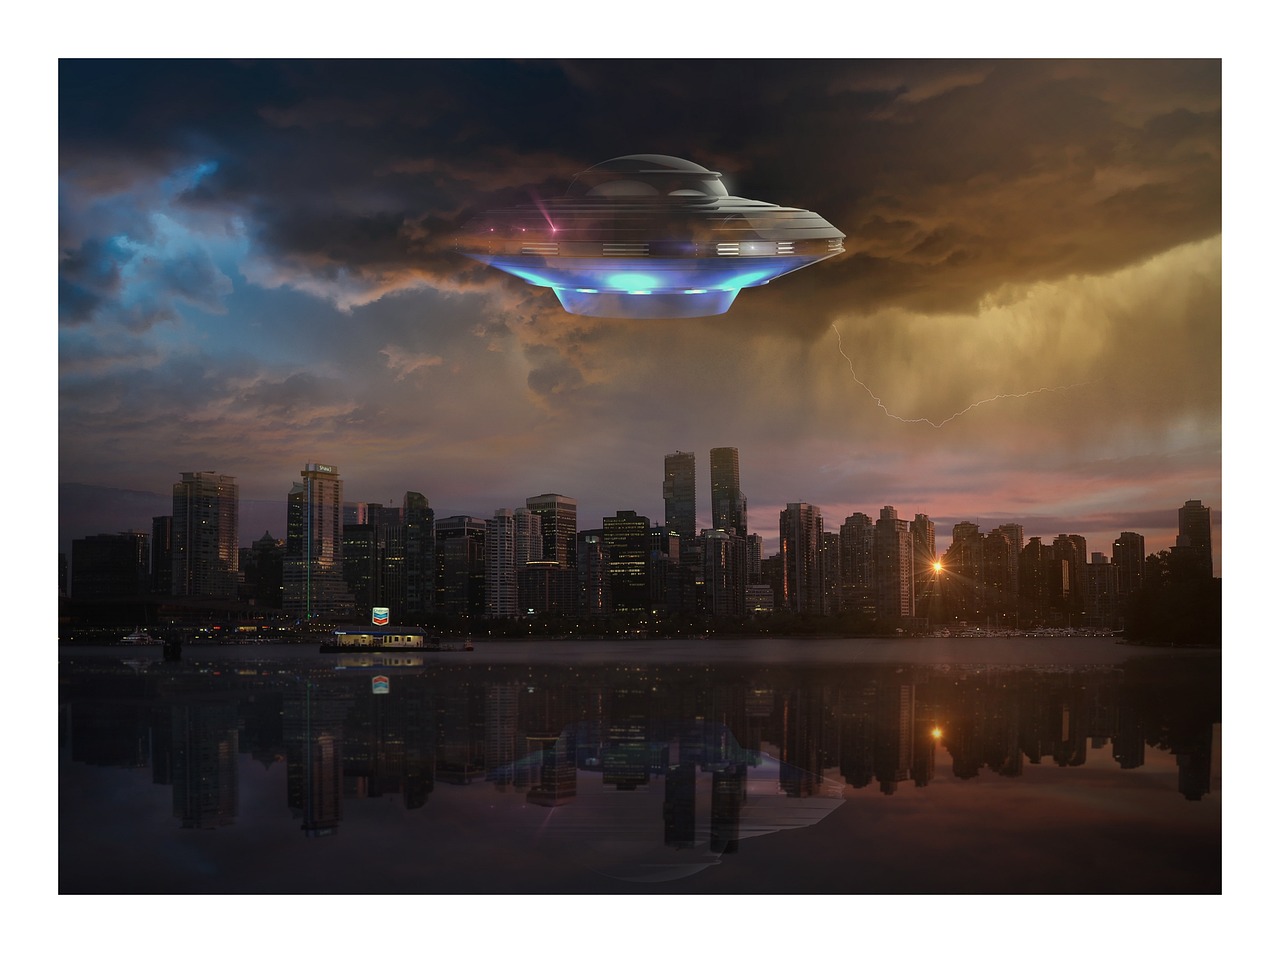 an alien flying over a city at night, by John La Gatta, shutterstock, flying saucer in the sky, saturn in the sky, in sci - fi mumbai, abduction